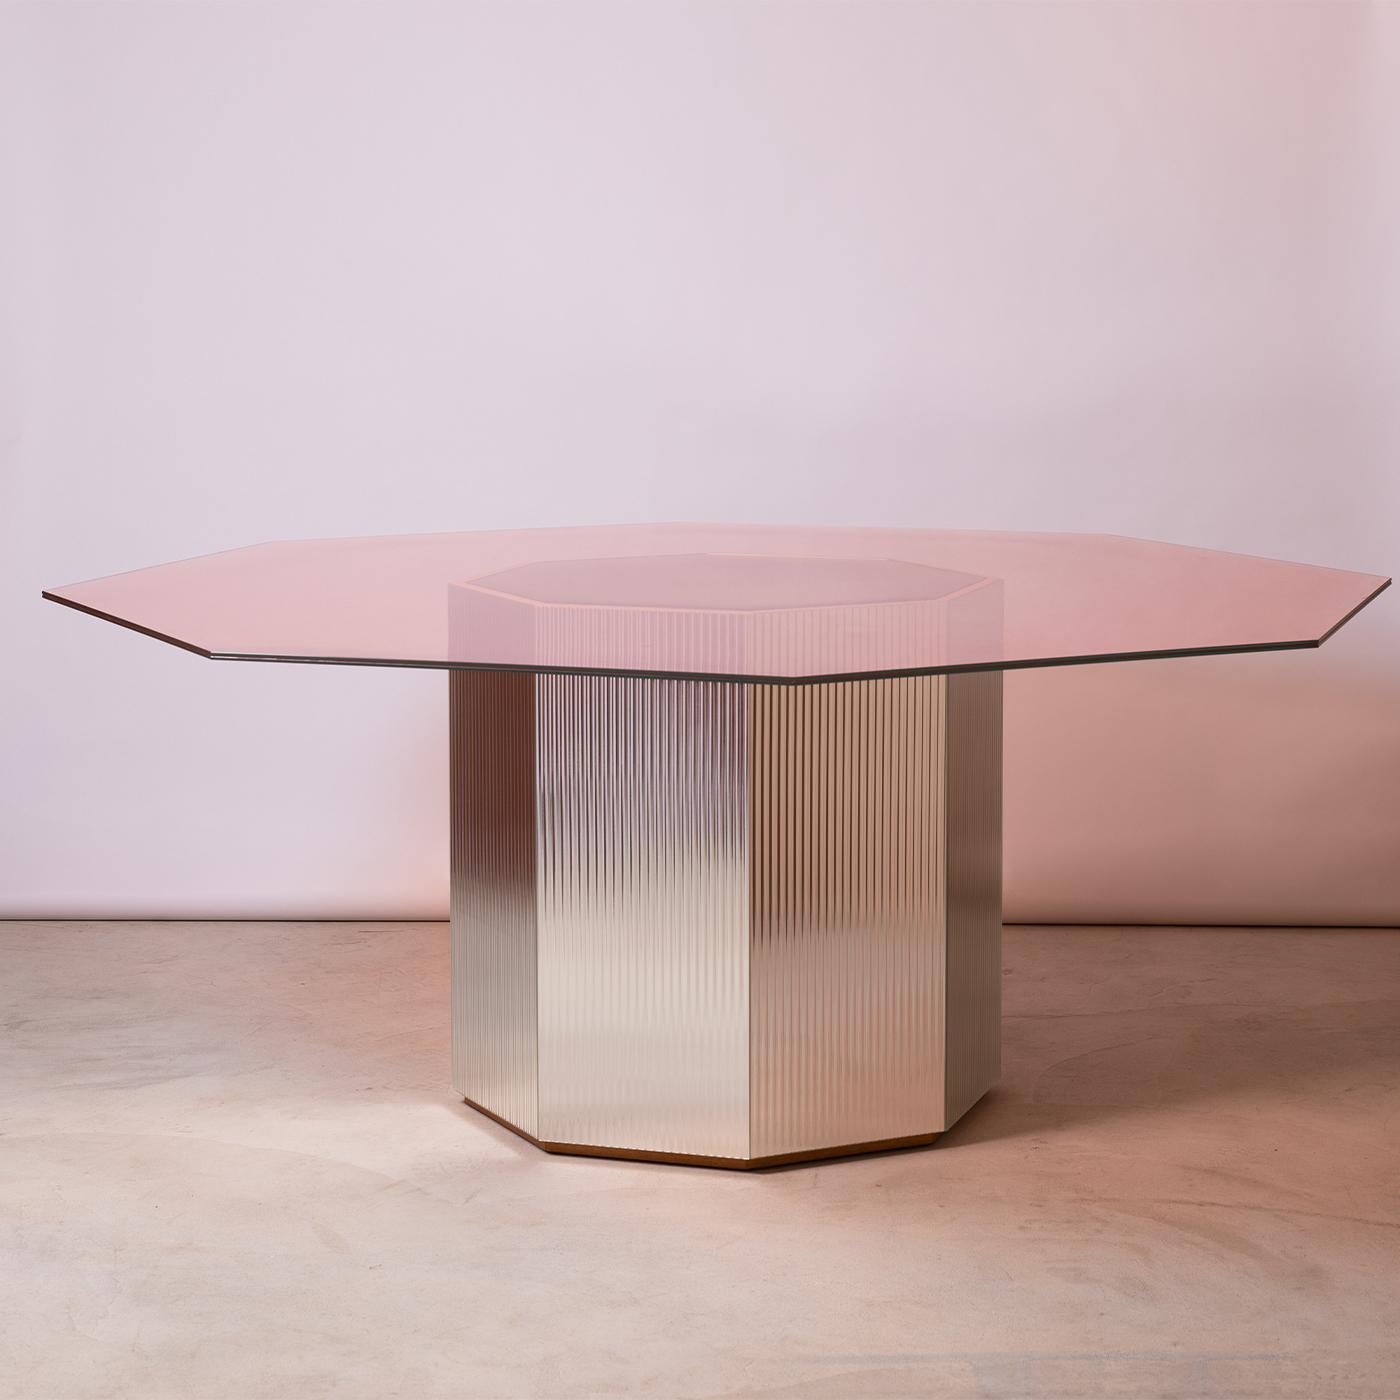 A larger version of the Sandra e Raimondo 140 table, this astonishing piece will create e luminous effect in a modern or contemporary dining interior. Featuring a handcrafted octagonal base in wood with a brilliant fluted glass overlay and an